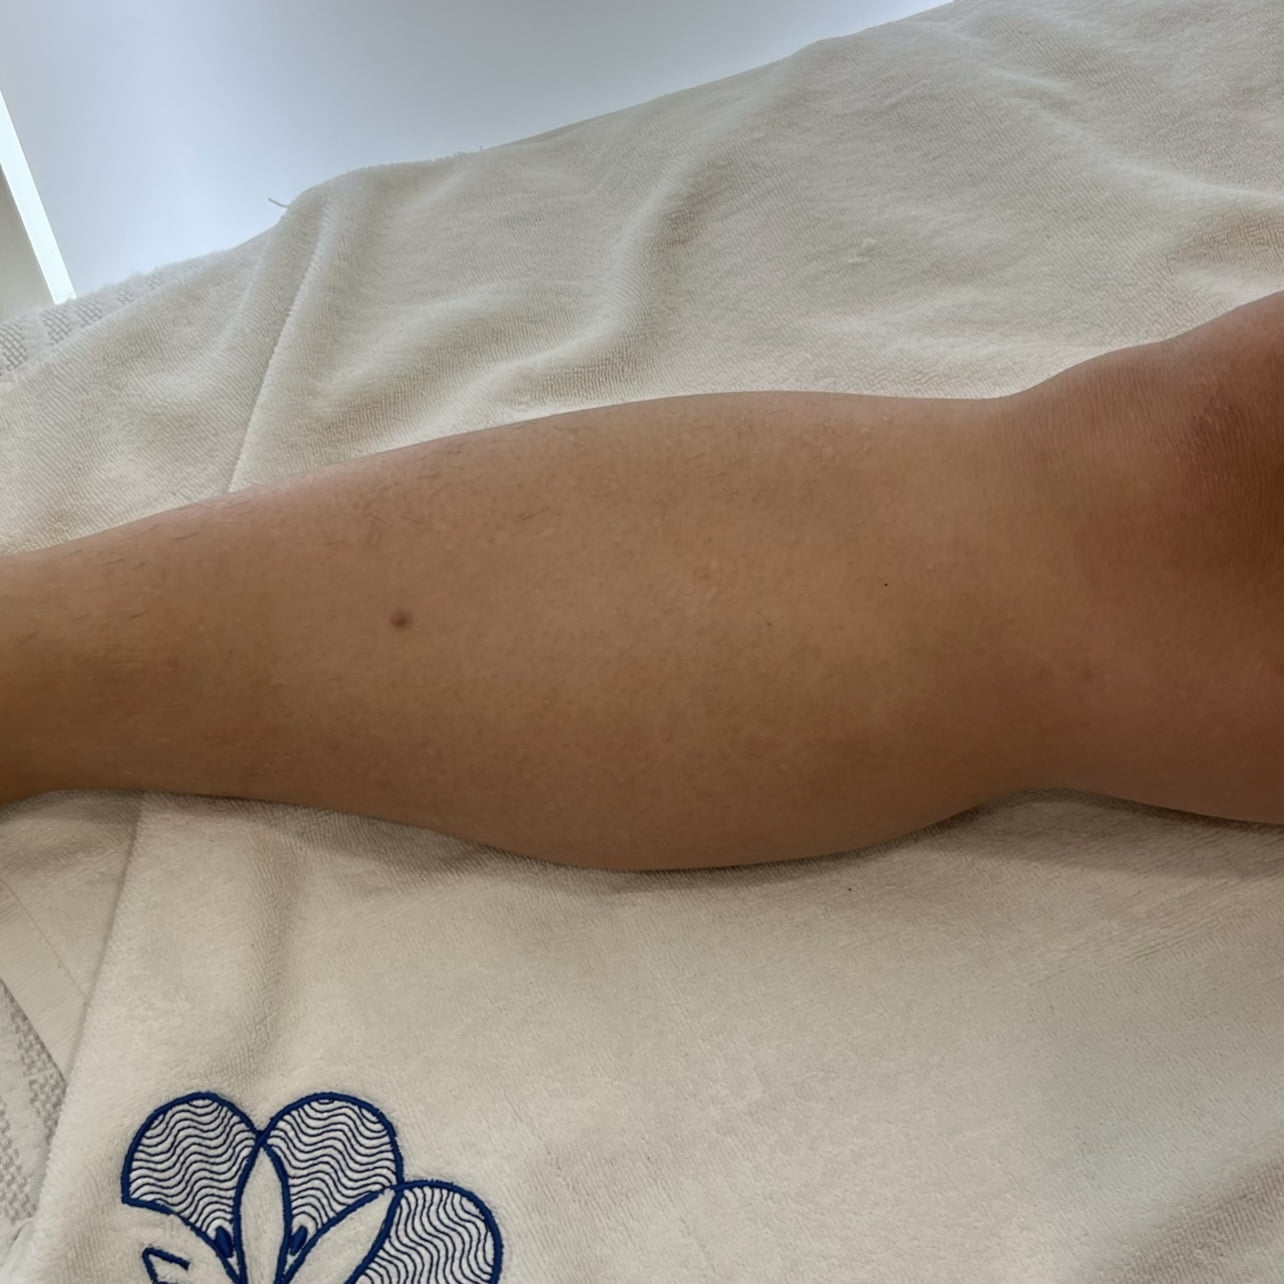 After 3 sessions of PiQo4 leg body Laser